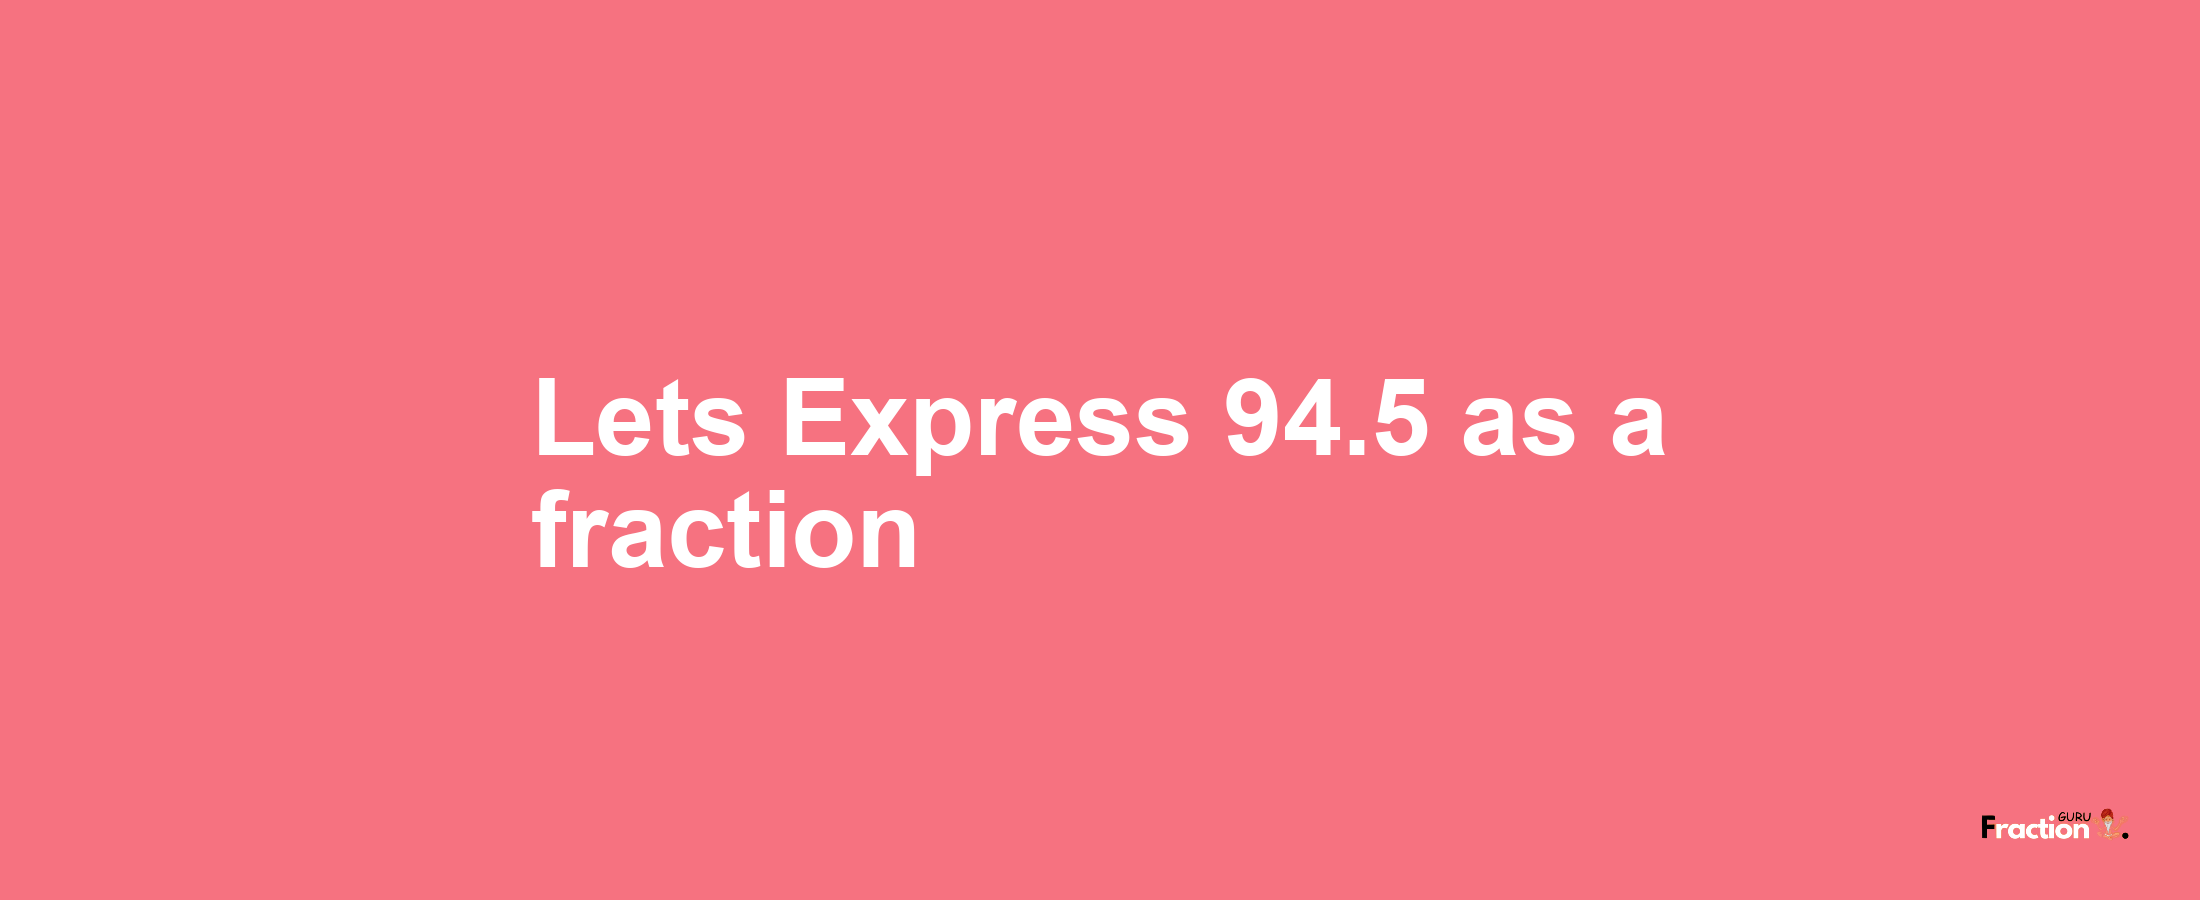 Lets Express 94.5 as afraction